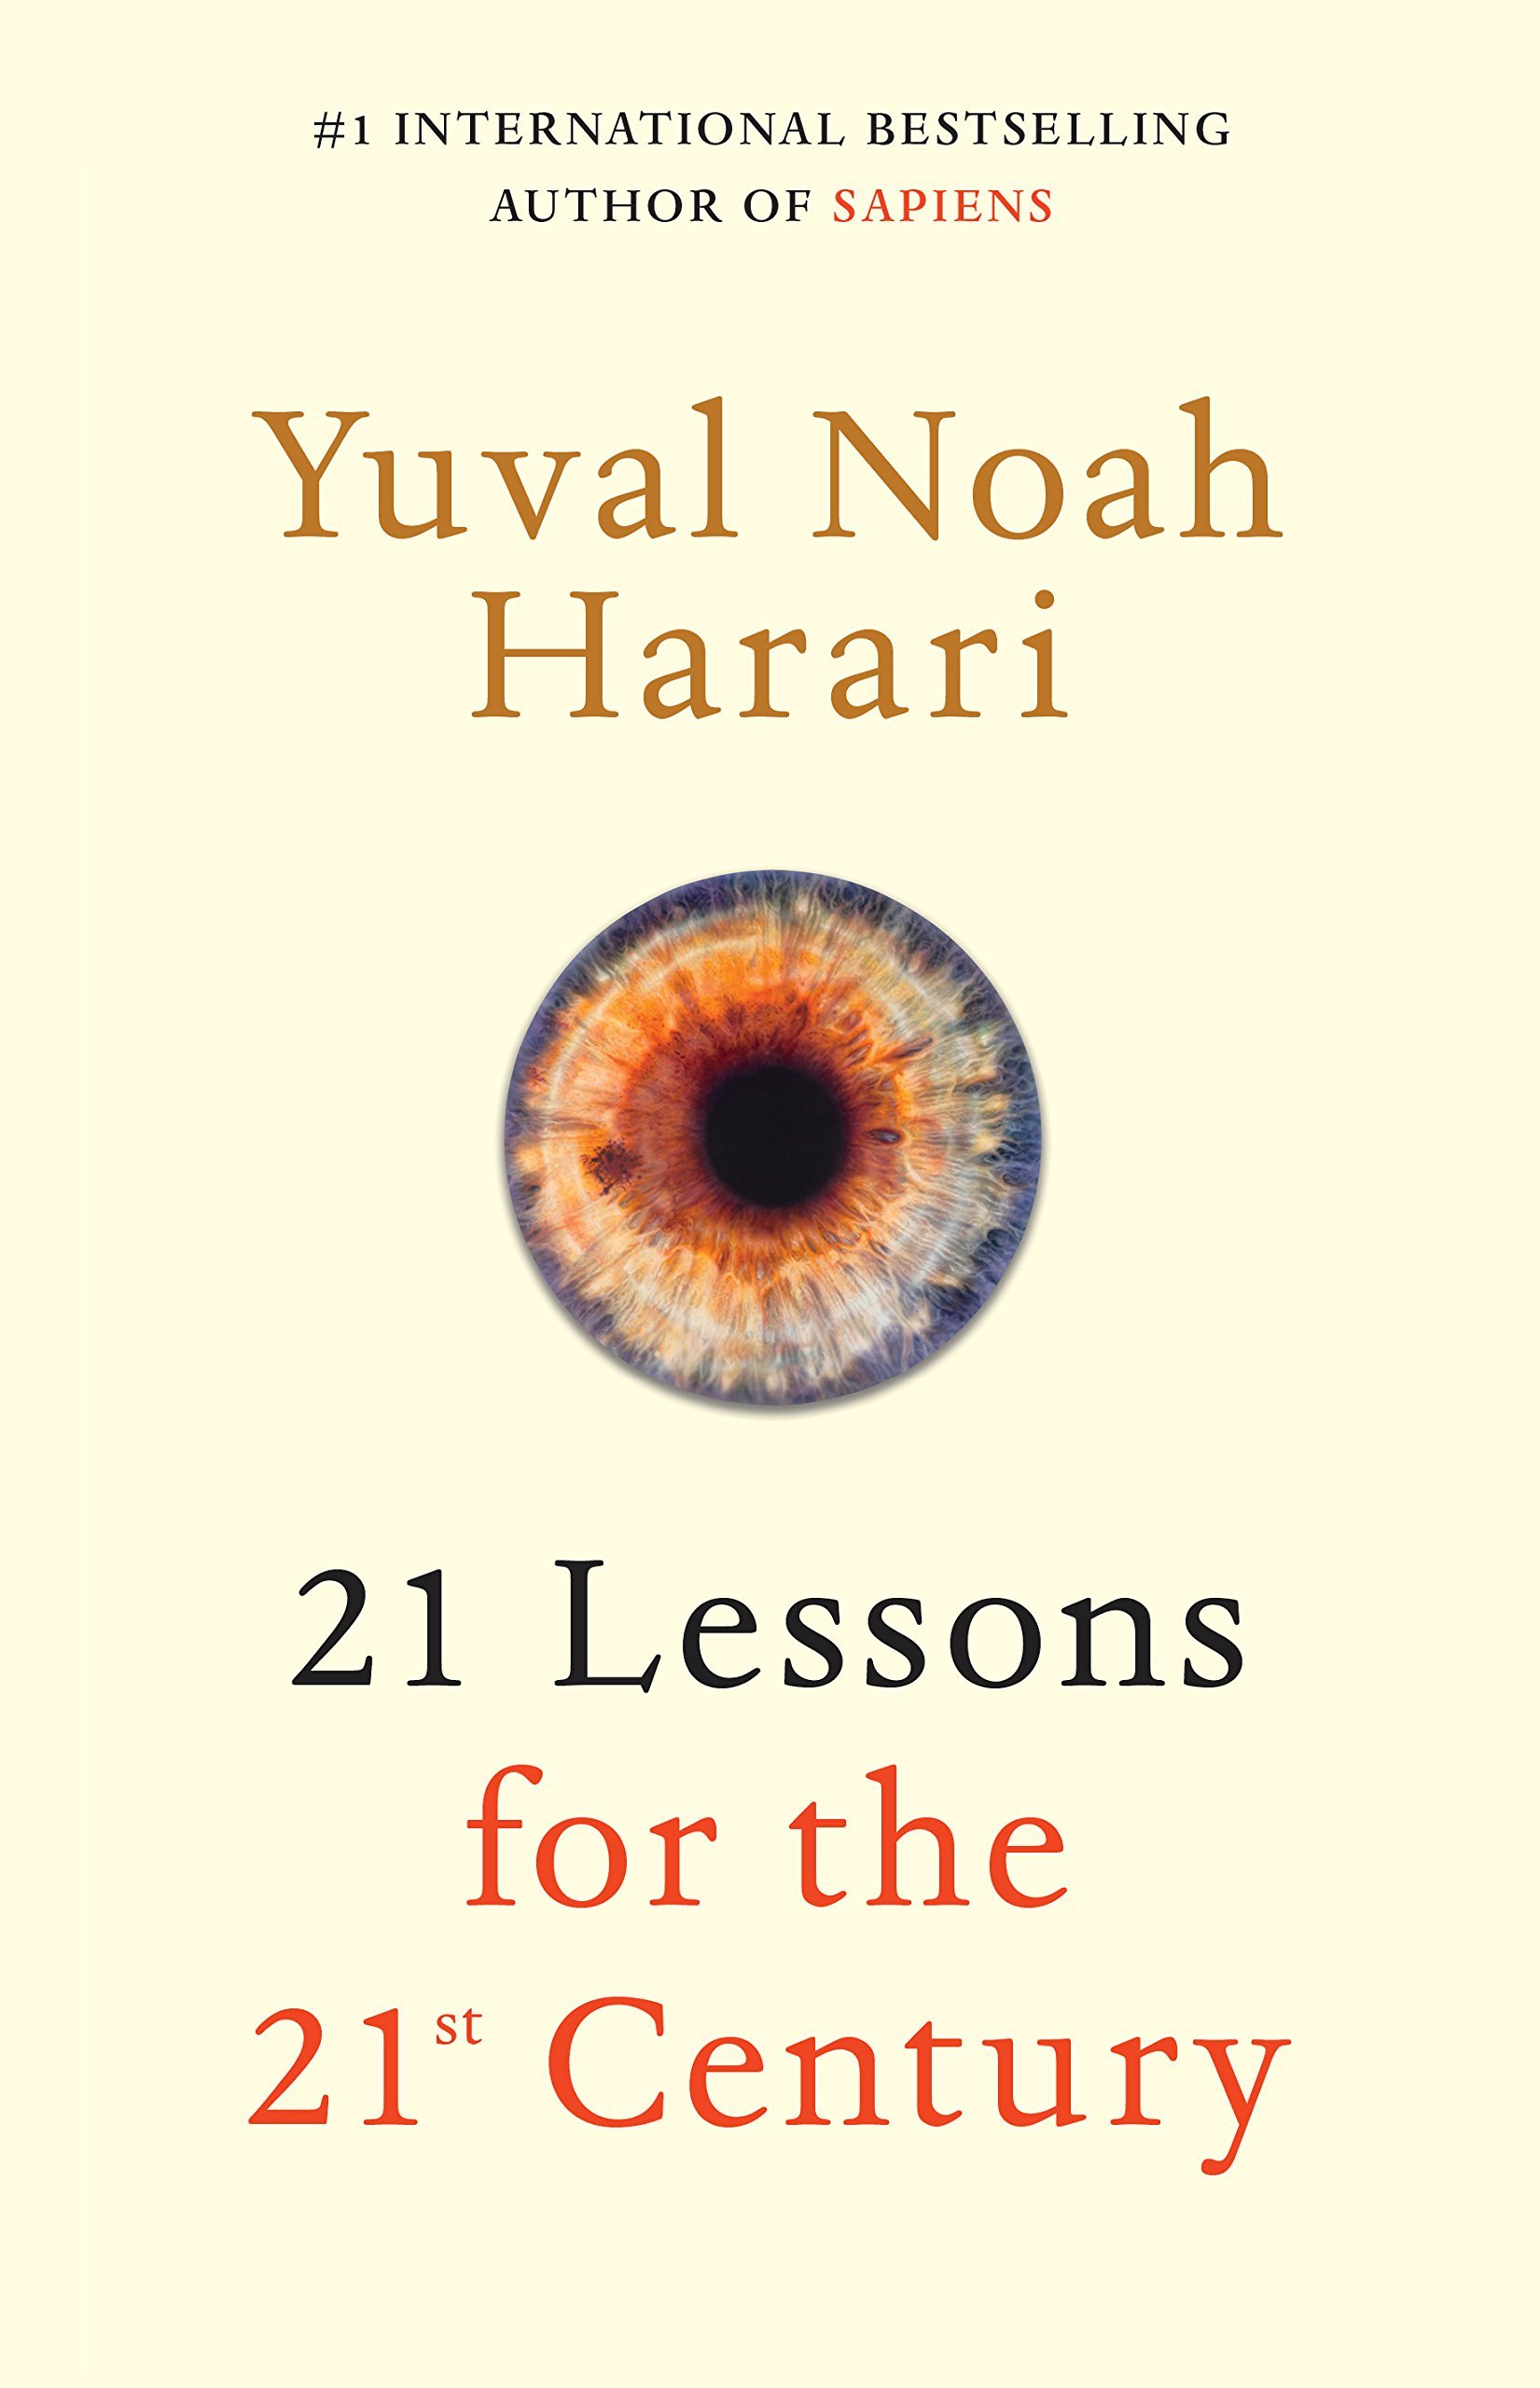 Harari's book: 21 Lessons for the 21st Century